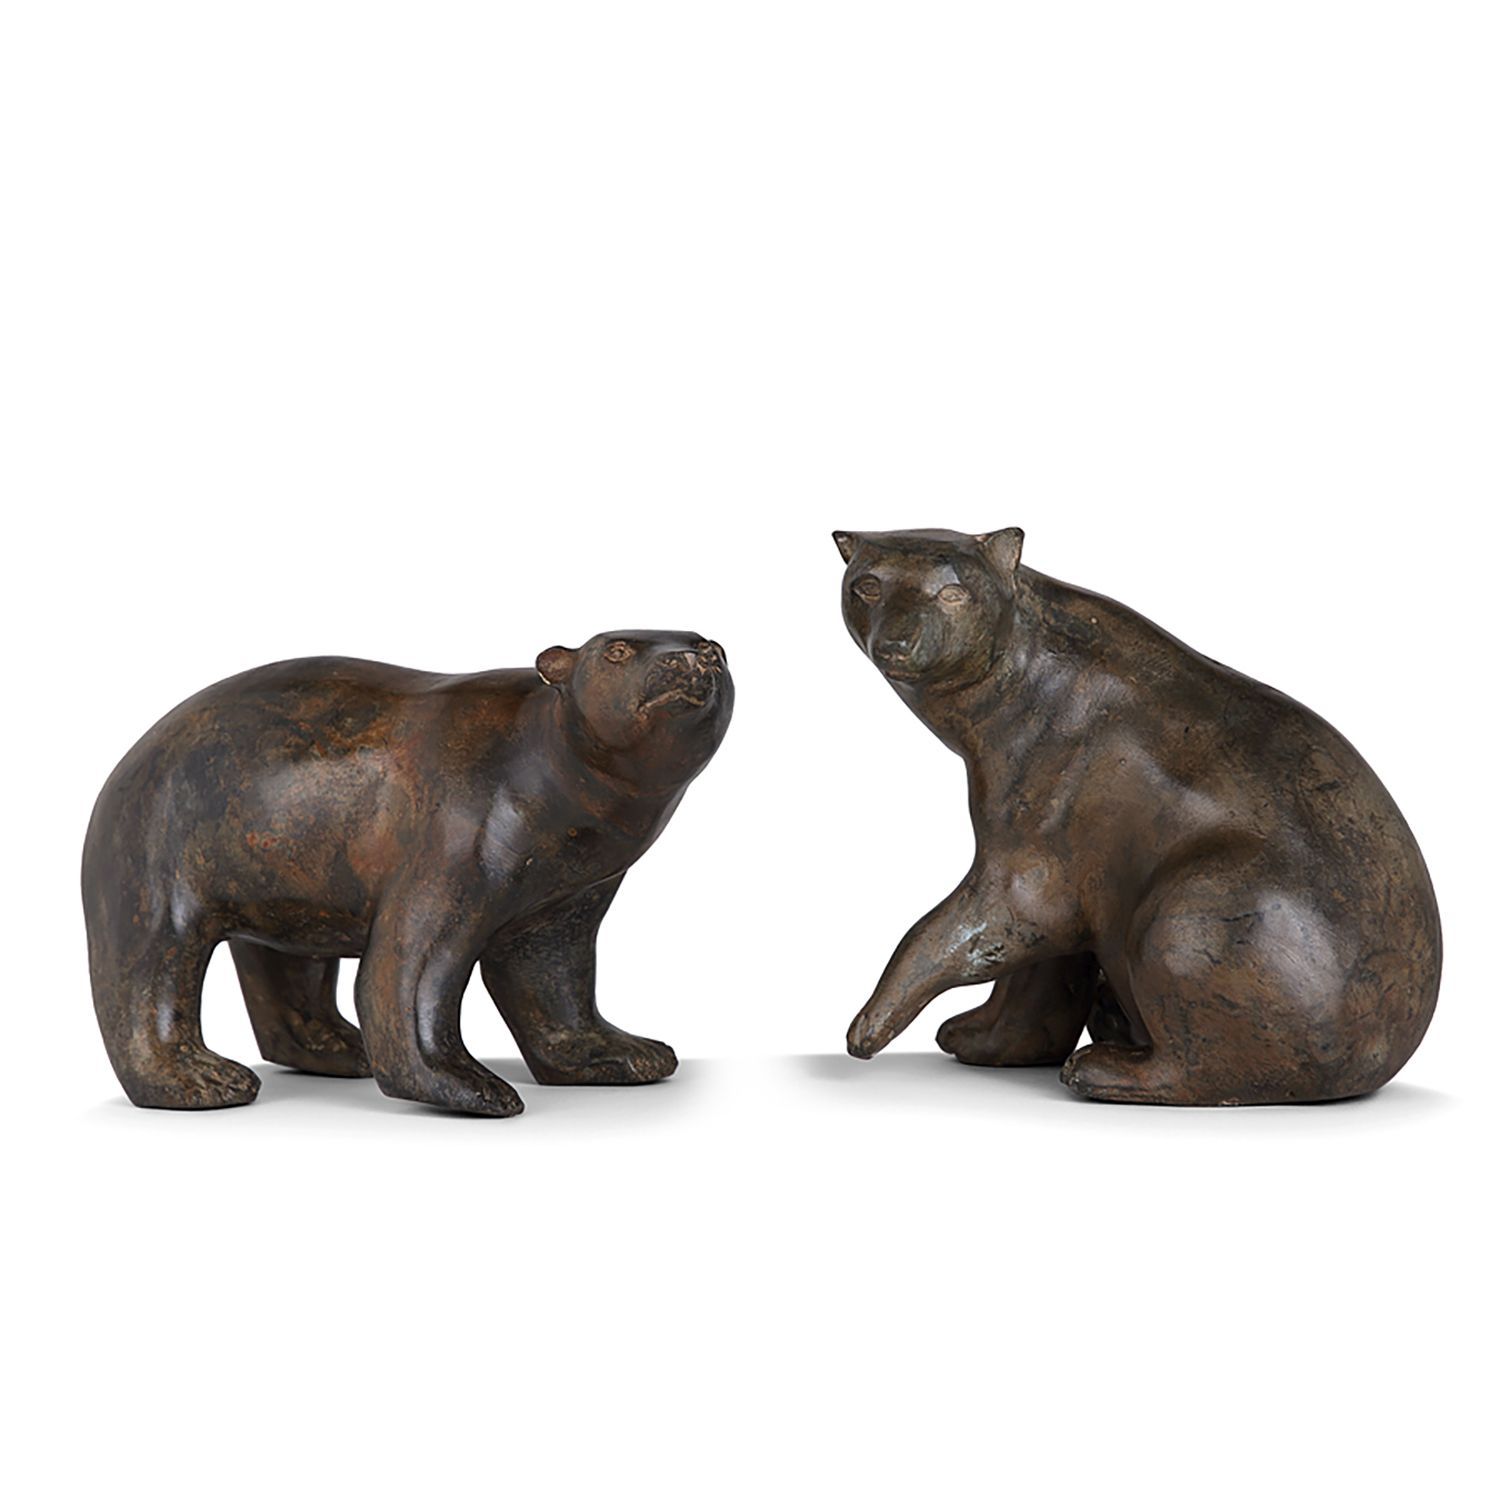 Null PIERRE CHENET (20TH-19TH CENTURY)

PAIR OF TWO BEARS 

Bronze with brown an&hellip;